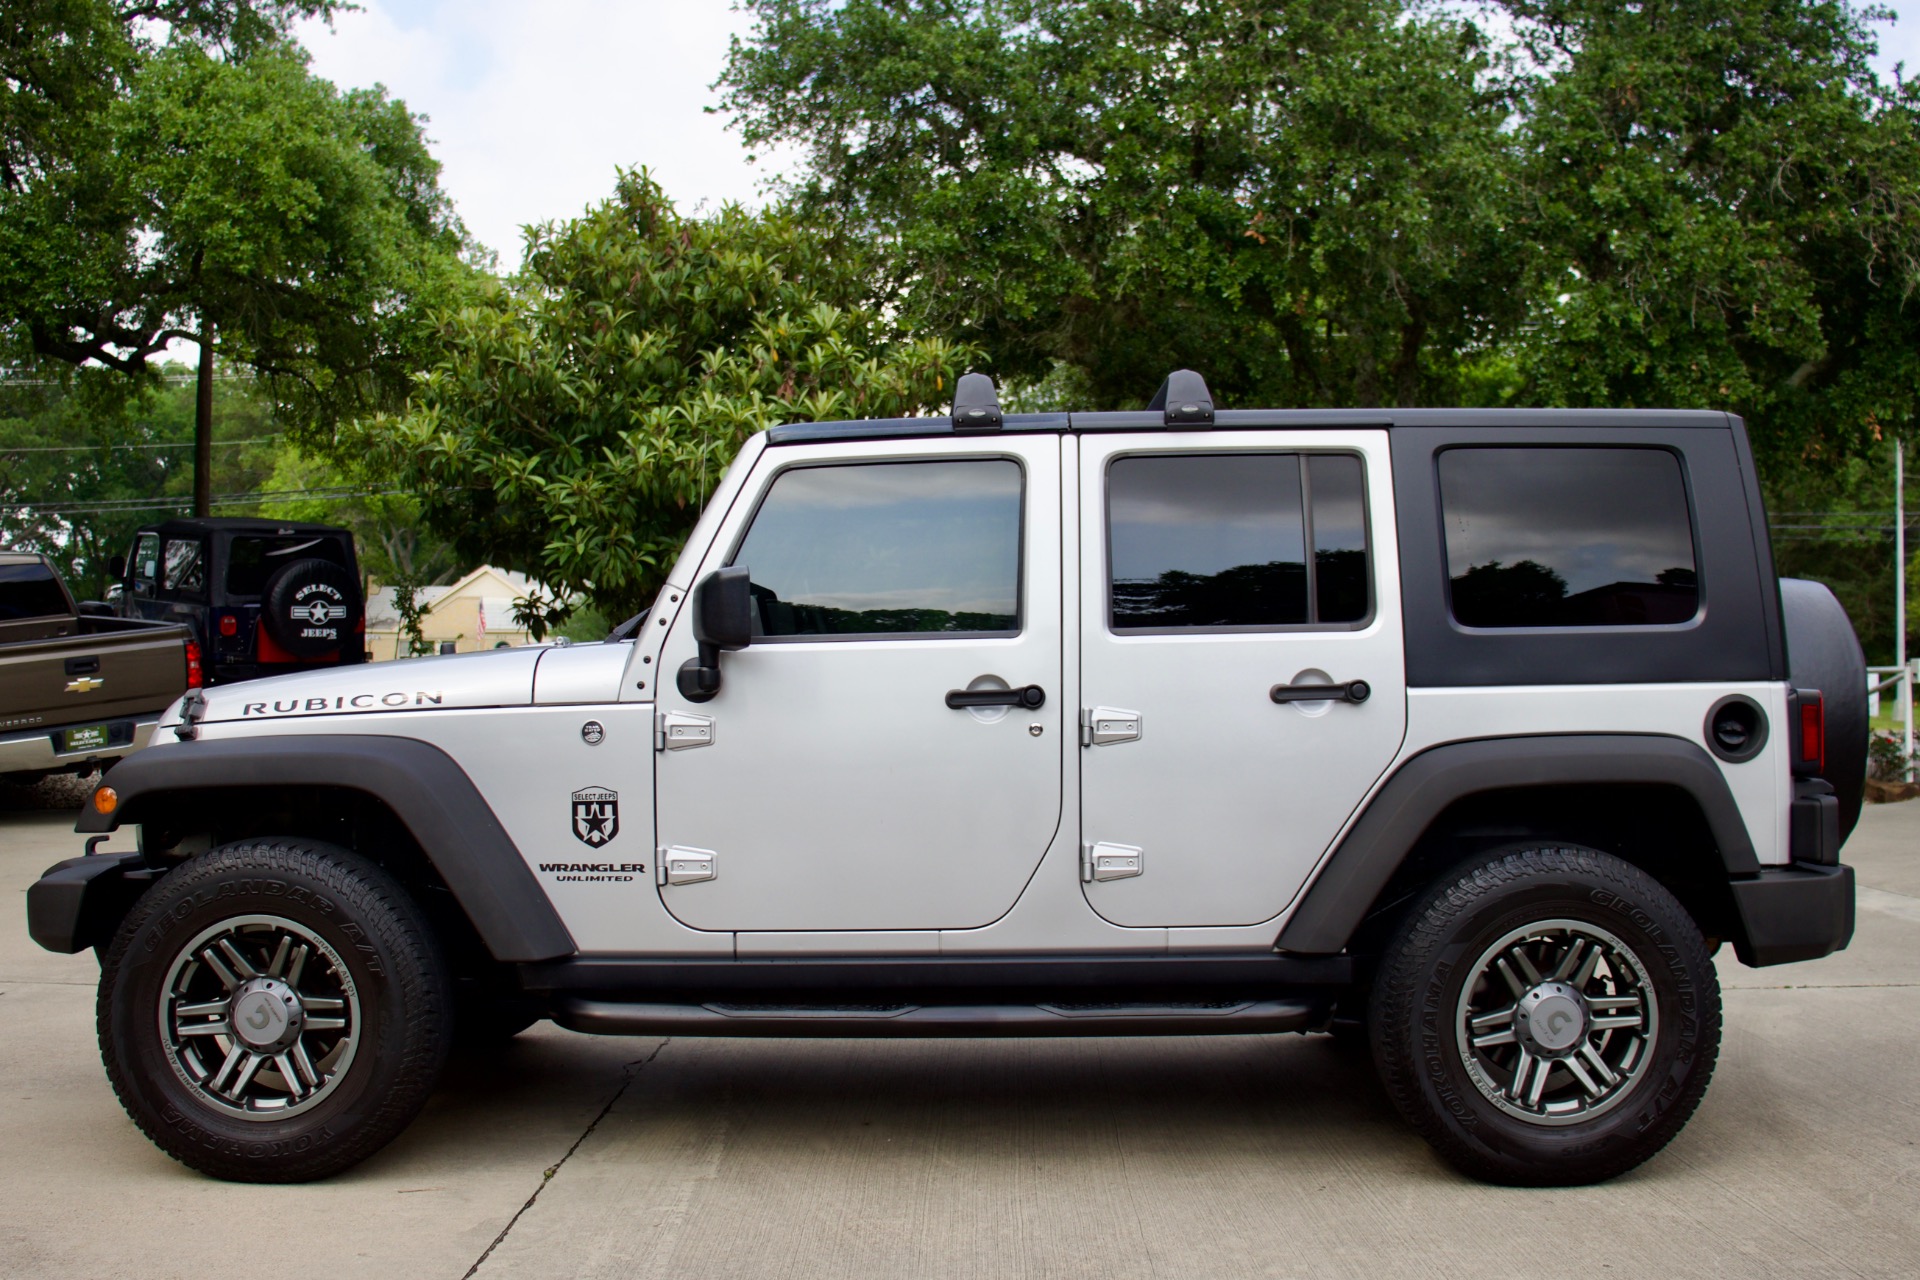 Used-2008-Jeep-Wrangler-Unlimited-Rubicon